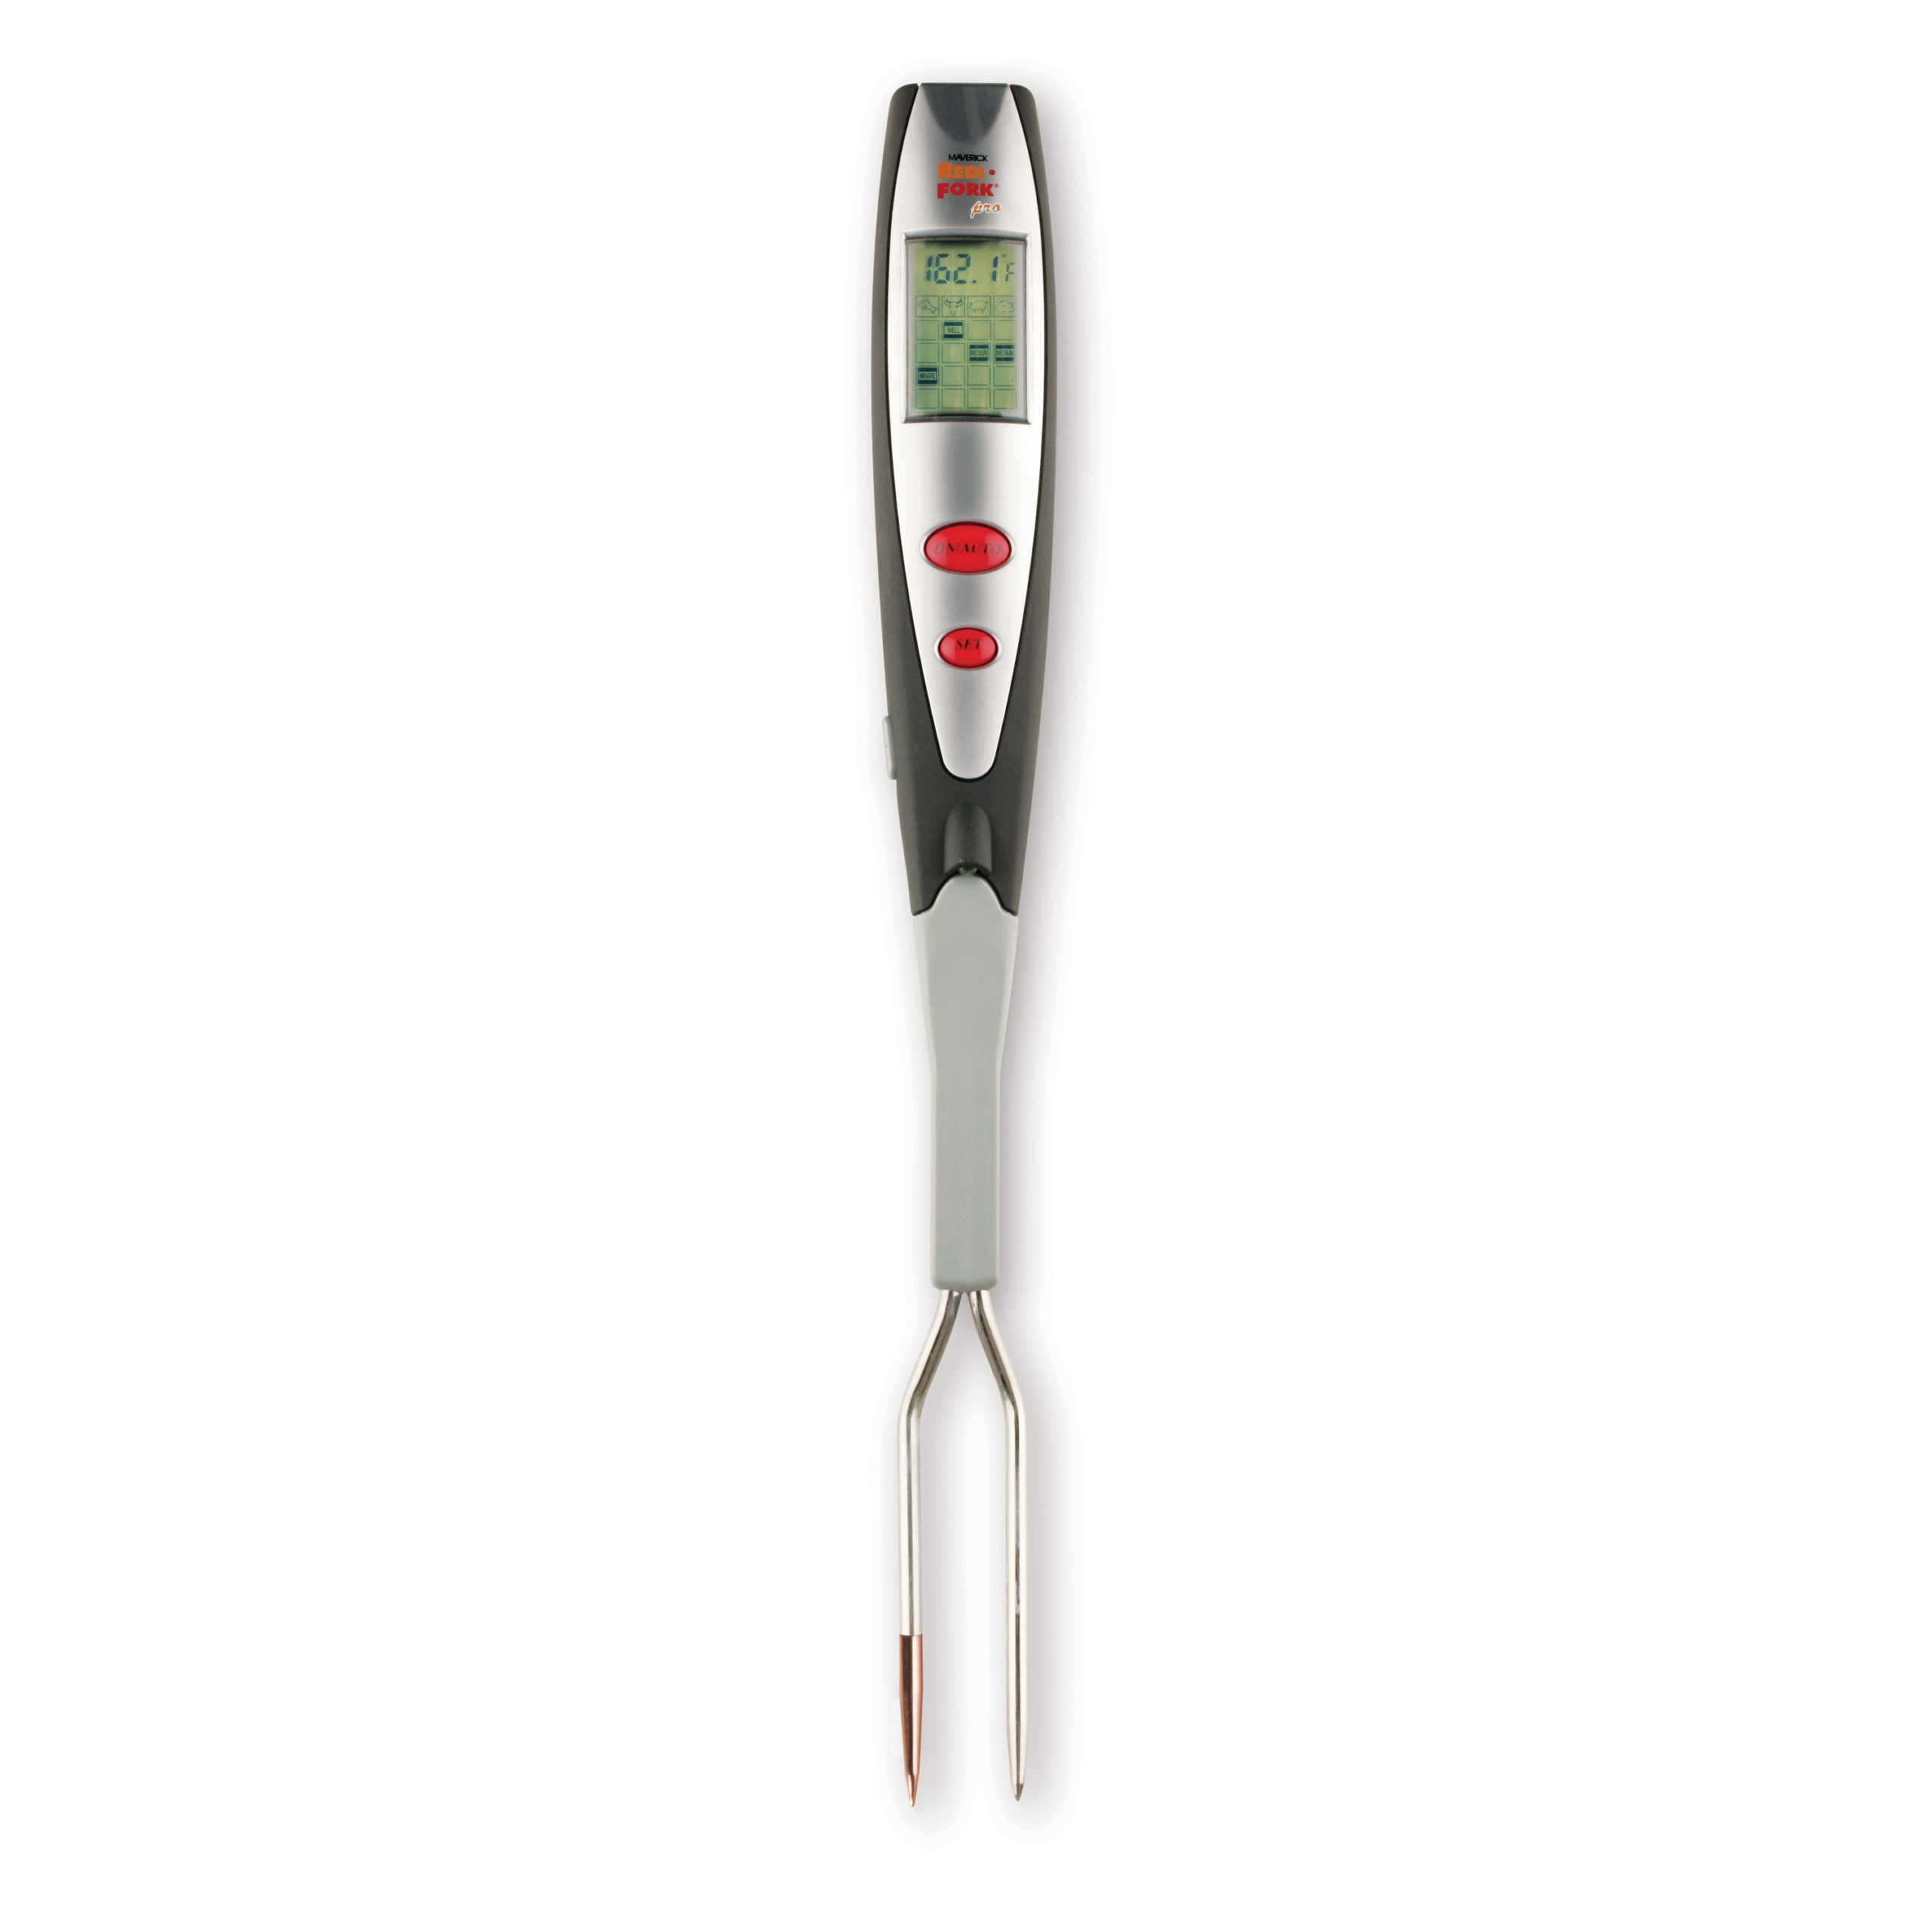 ET-64 Digital Grilling Thermometer With Rapid Read Tip